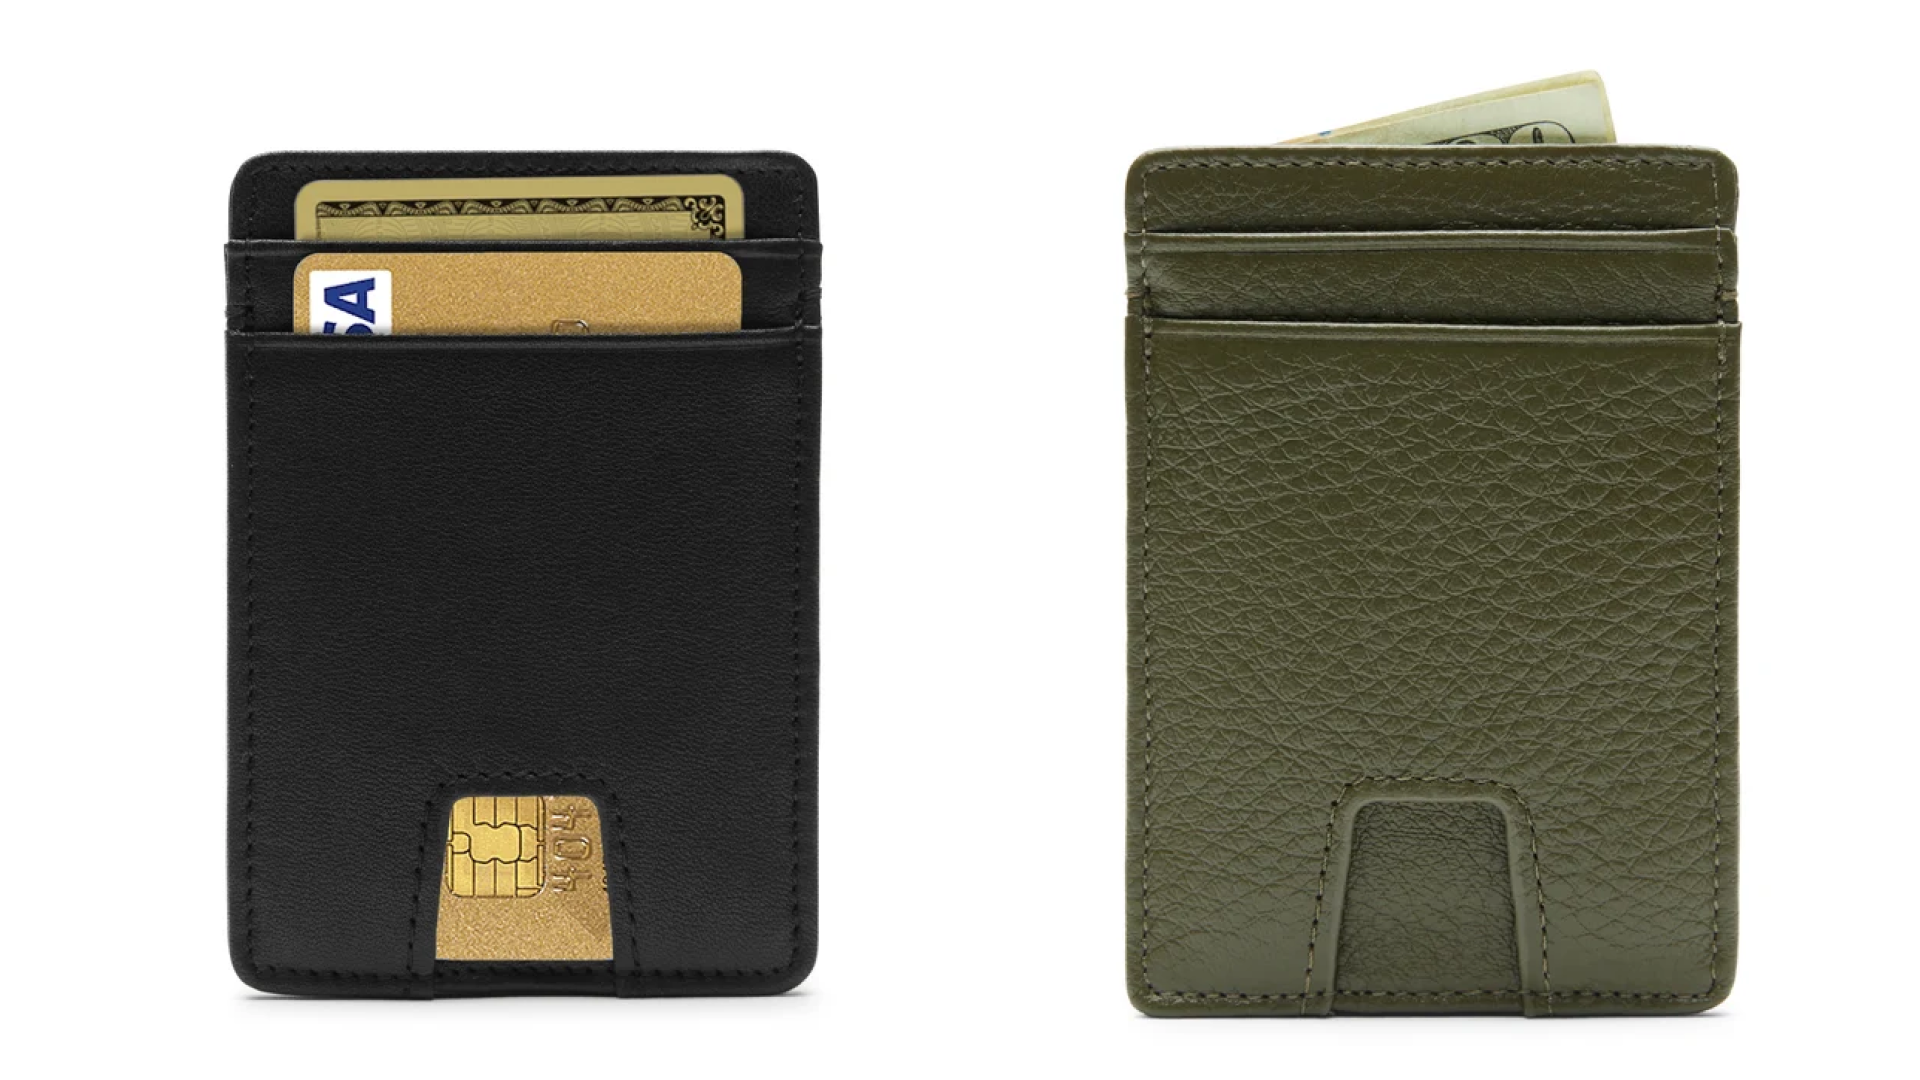 slim card wallet for credit cards and cash